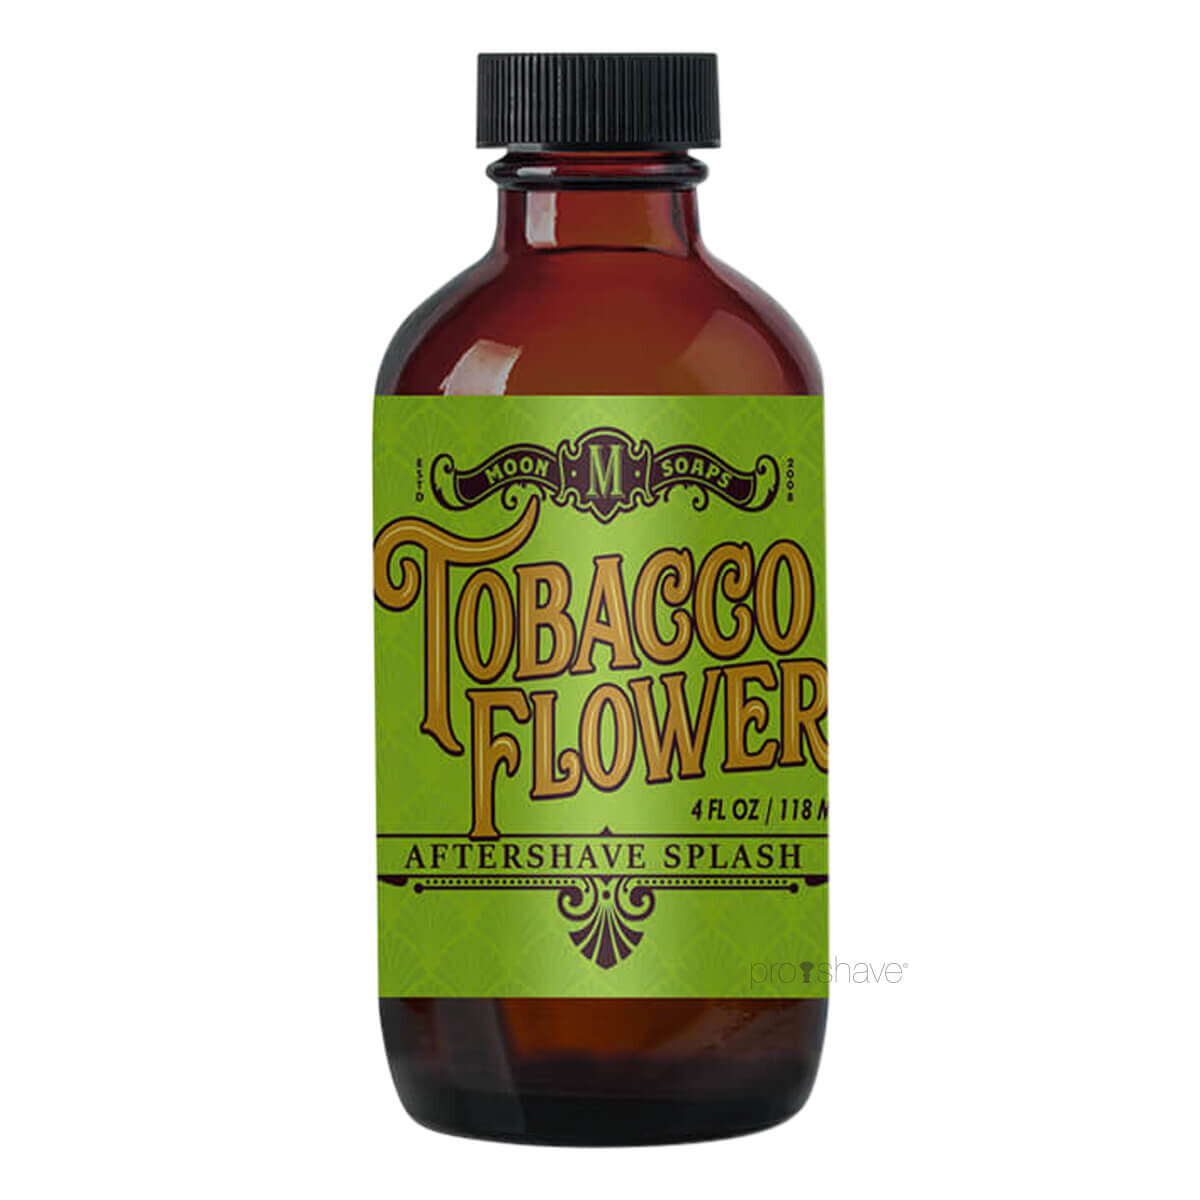 Moon Soaps Aftershave, Tobacco Flower, 118 ml.